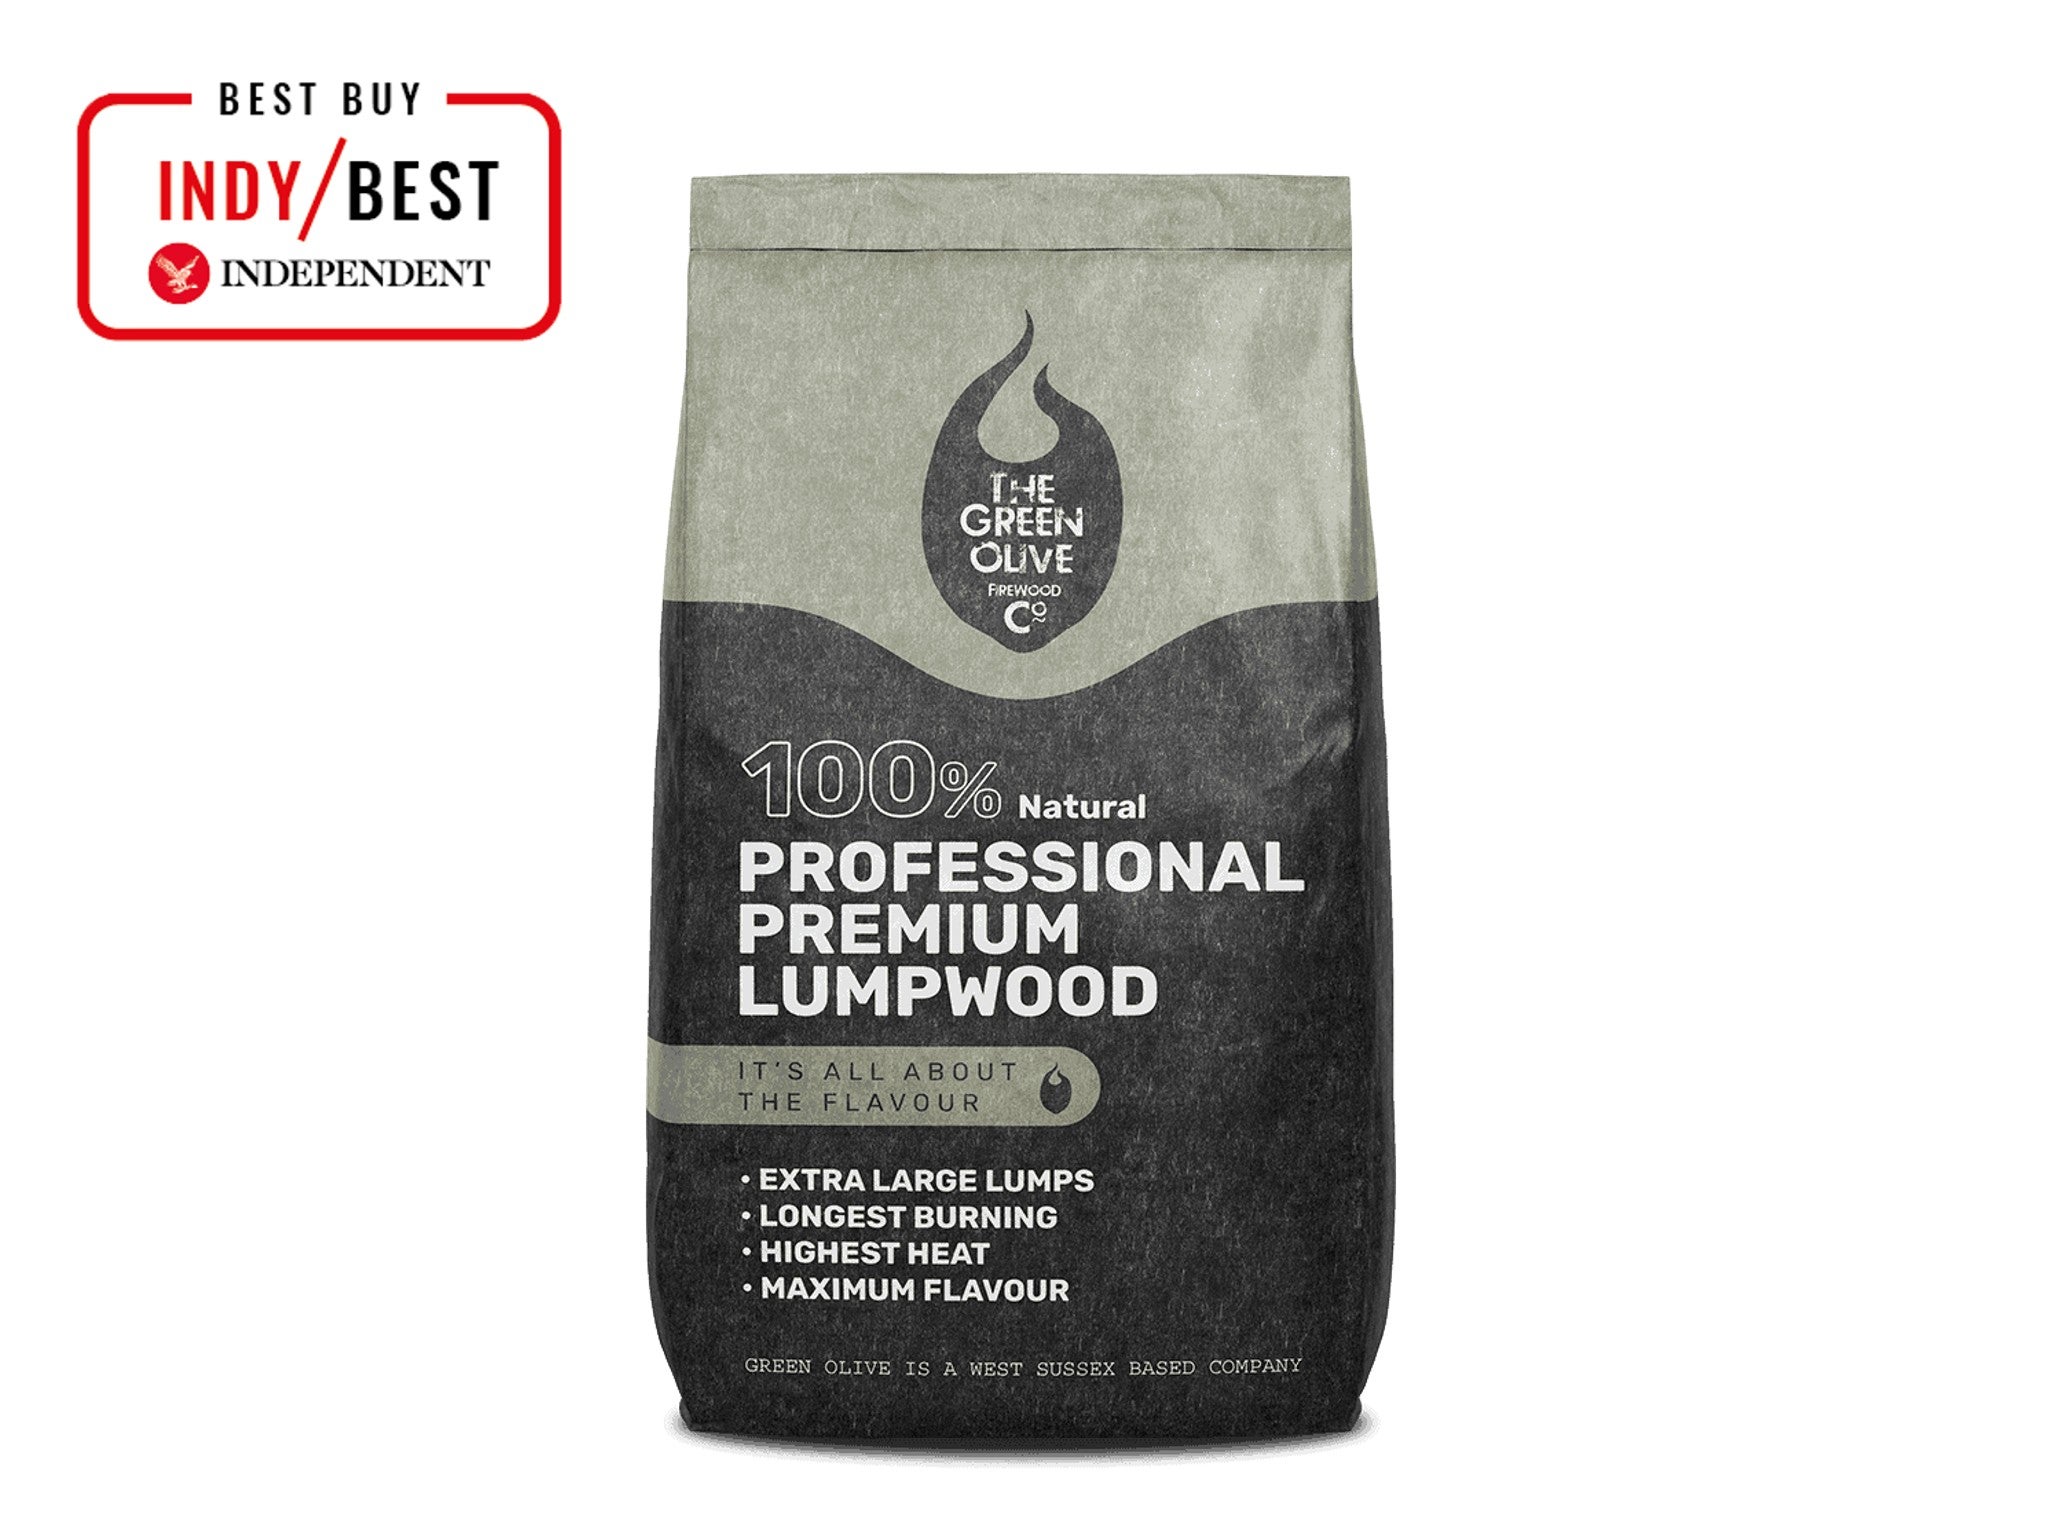 The Green Olive Firewood Co premium professional lumpwood charcoal indybest